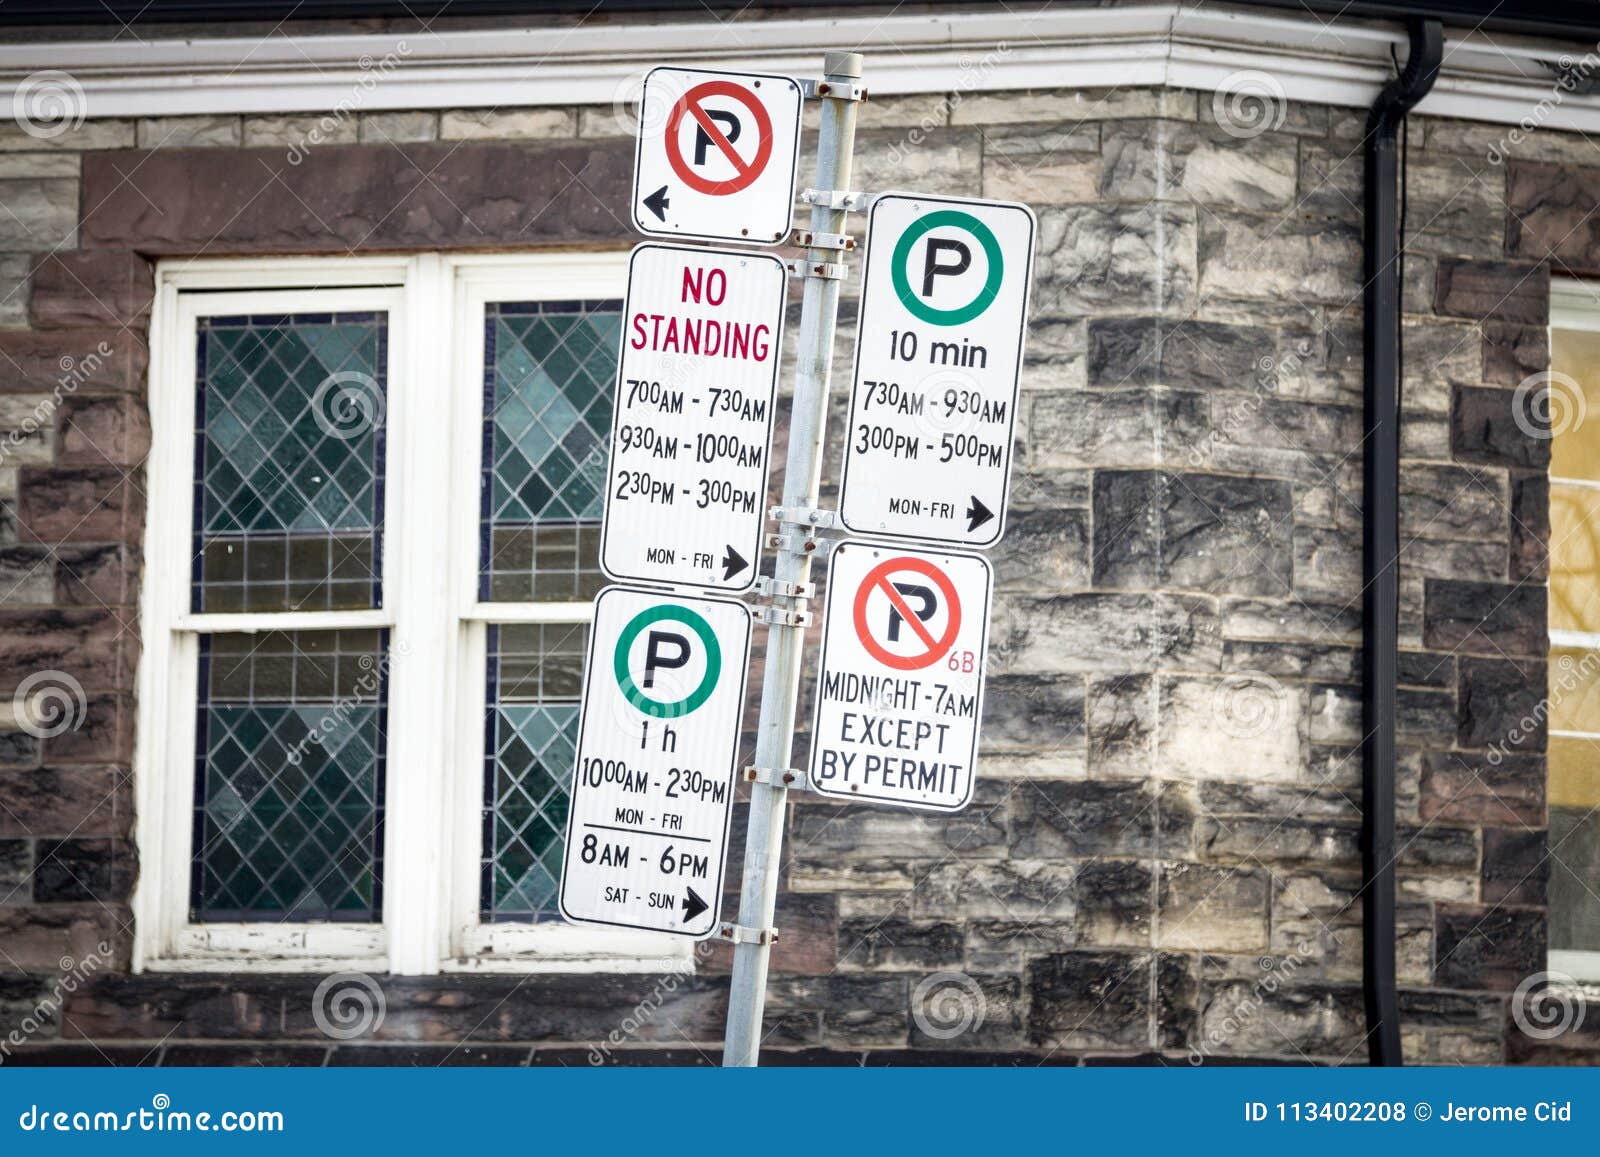 typical north american no parking signs with detailed instructions on the parking regulations taken in toronto, ontario, canada